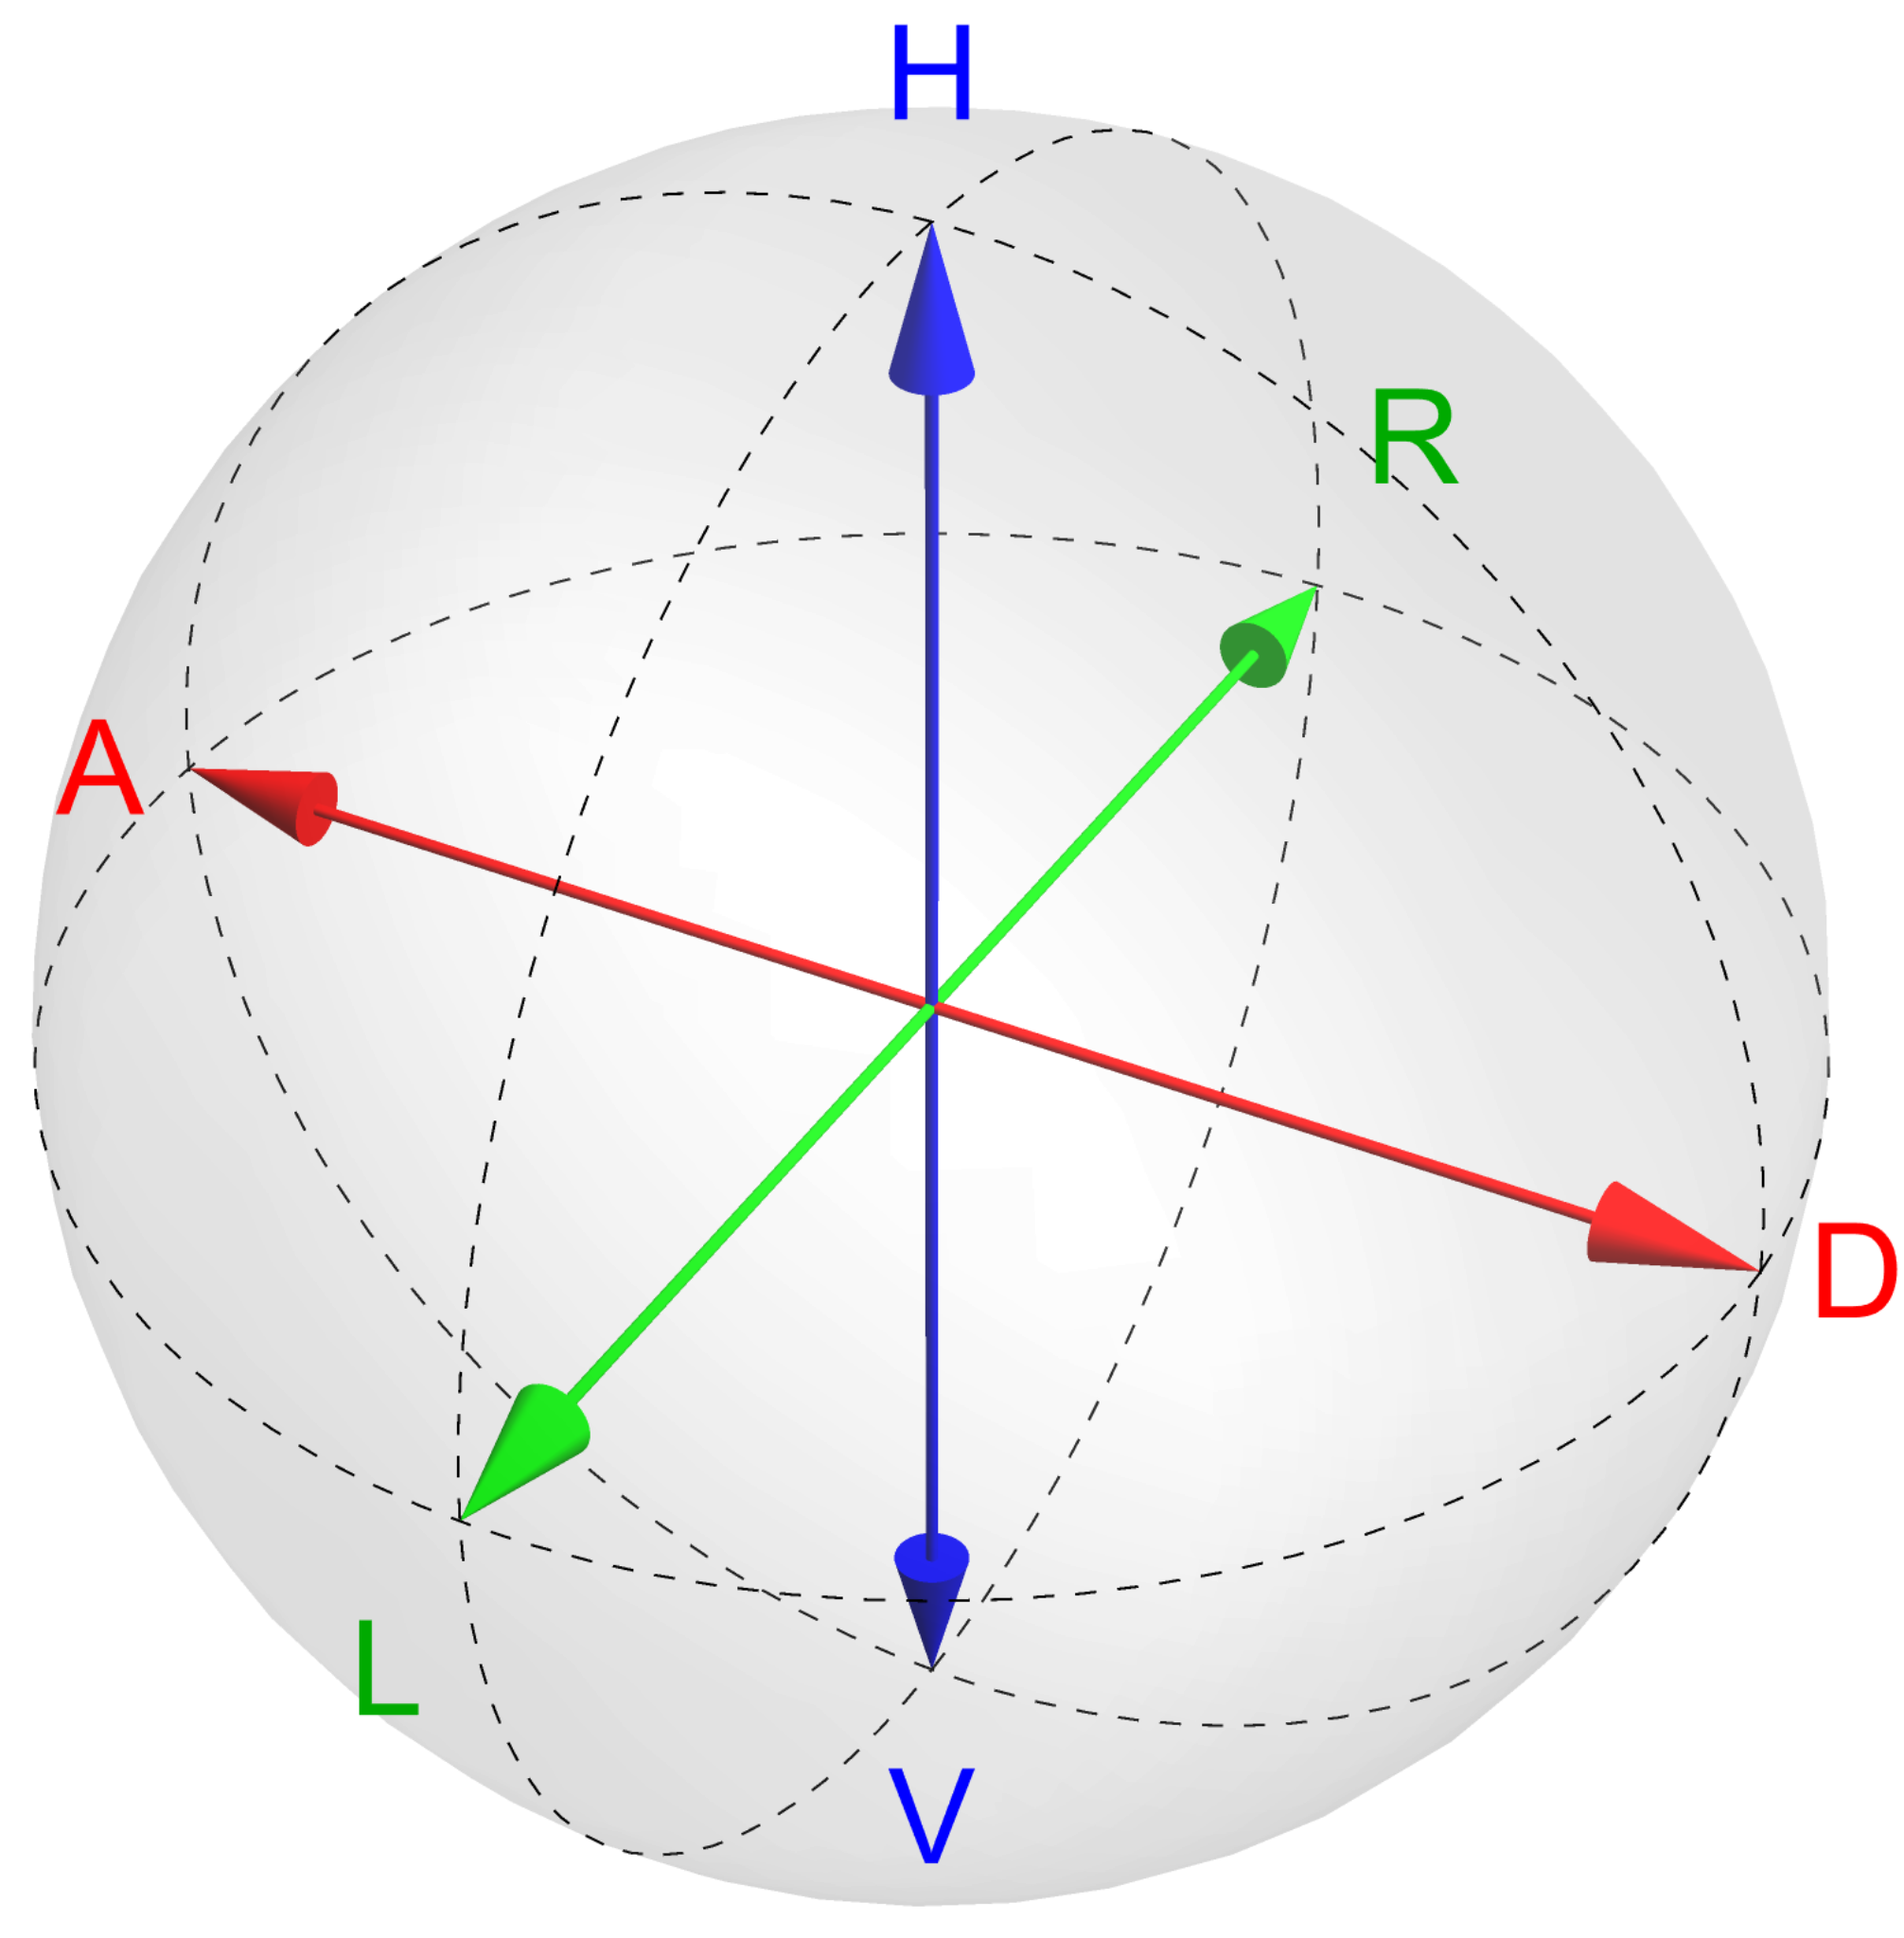 File:Poincare sphere 3d.gif - Wikimedia Commons